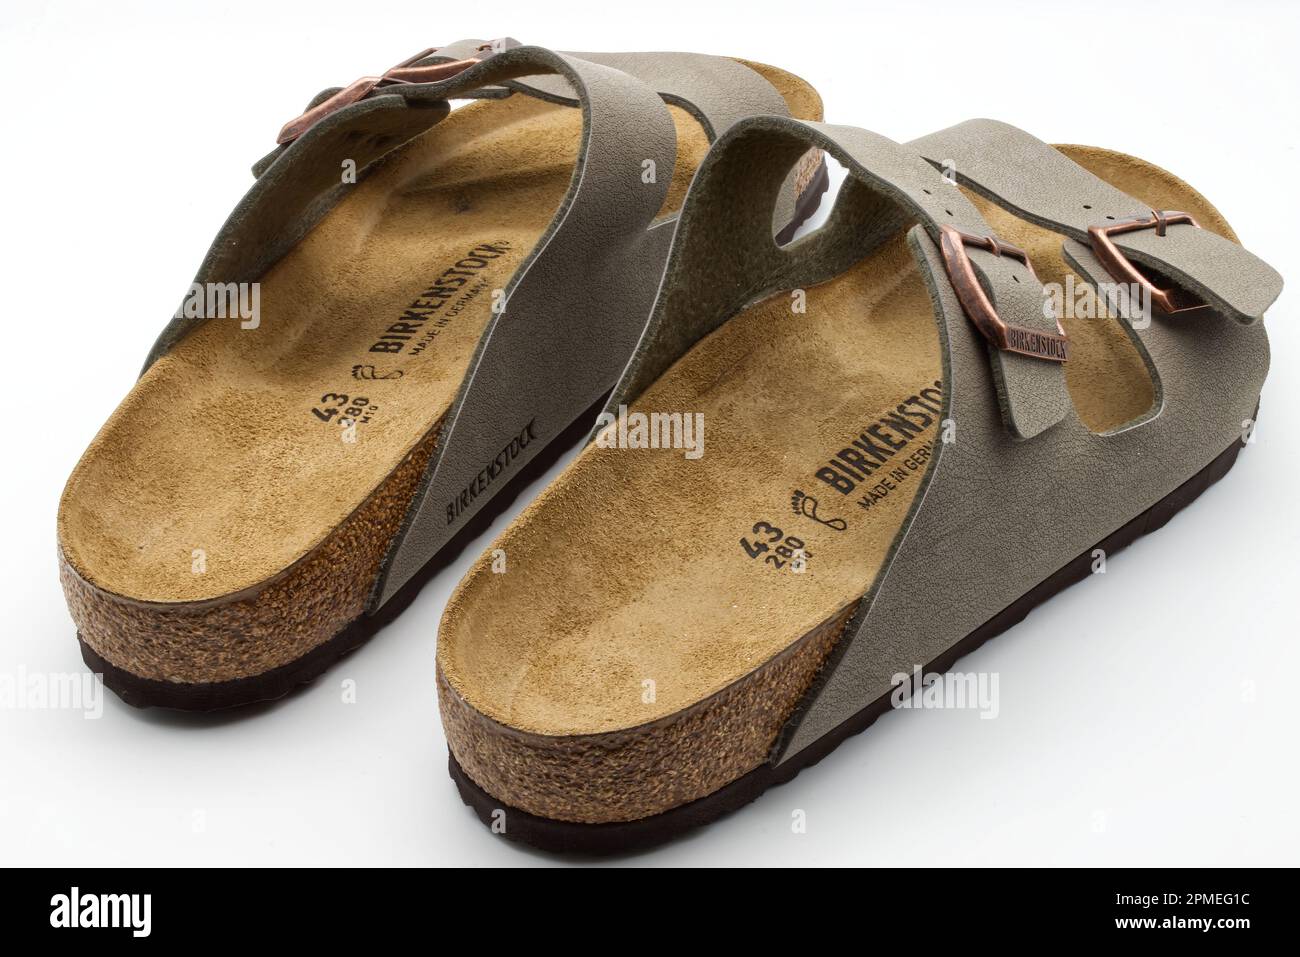 Birkenstock shoe hi-res stock photography and images - Alamy